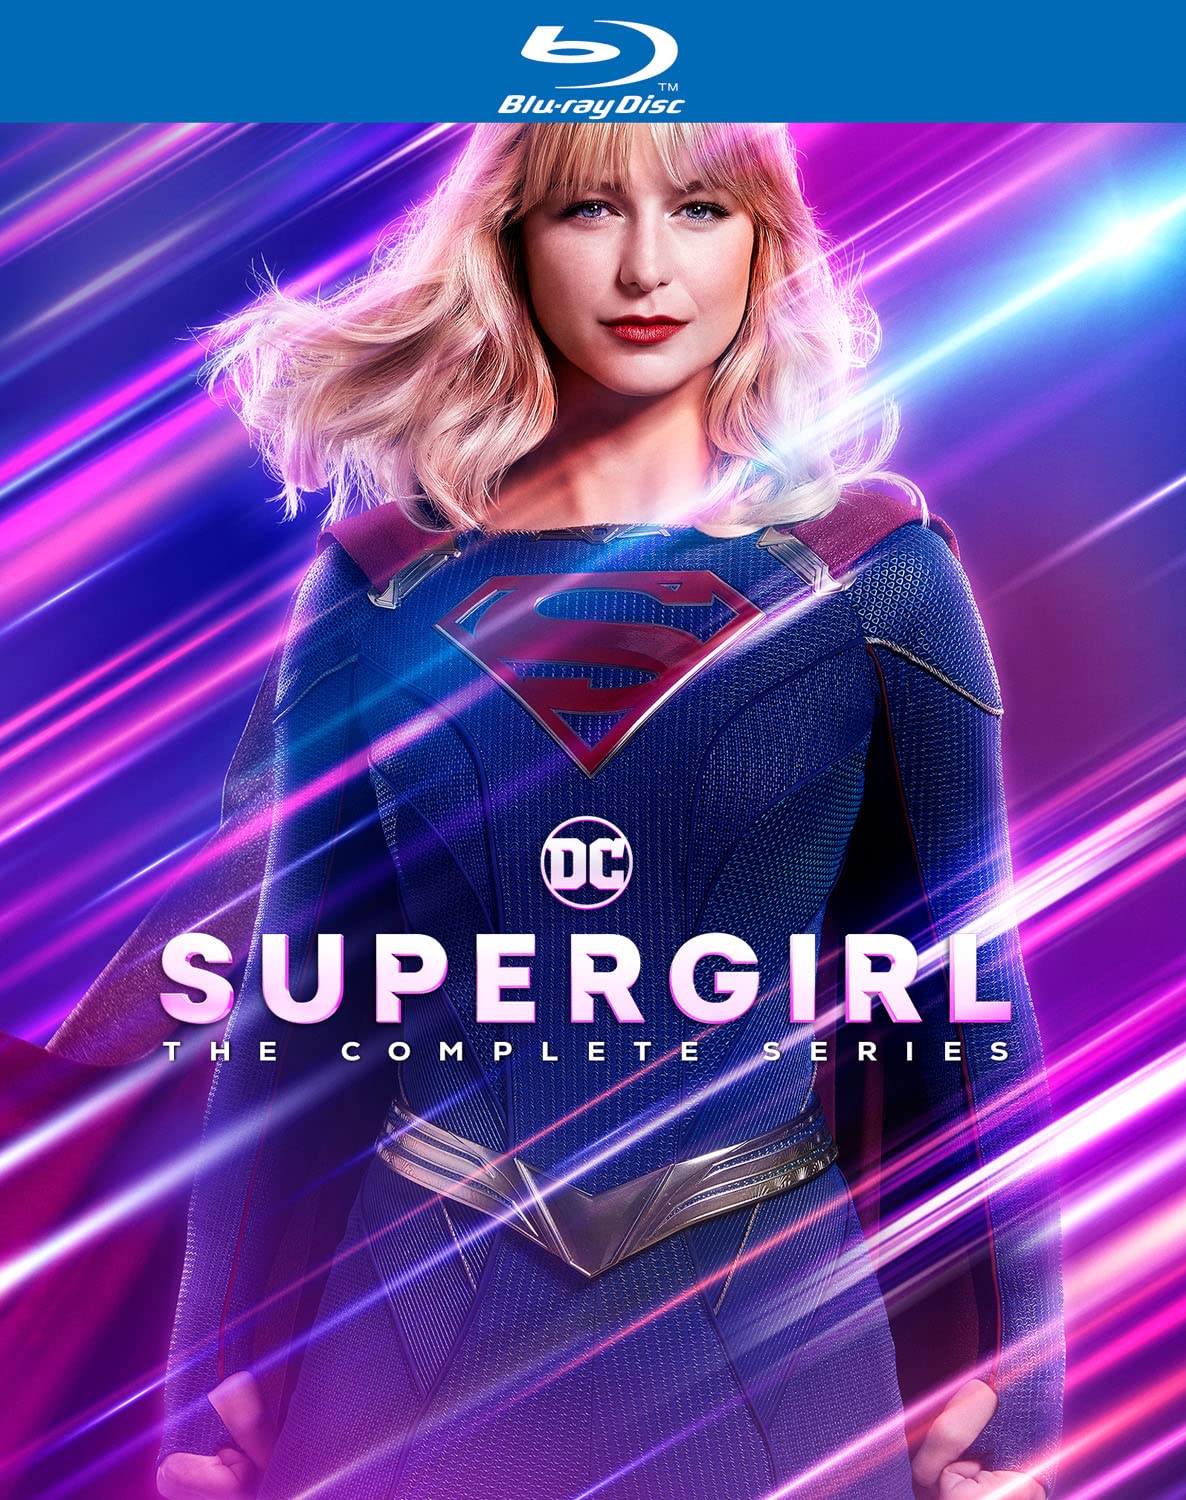 Supergirl- The Complete Series Blu-ray